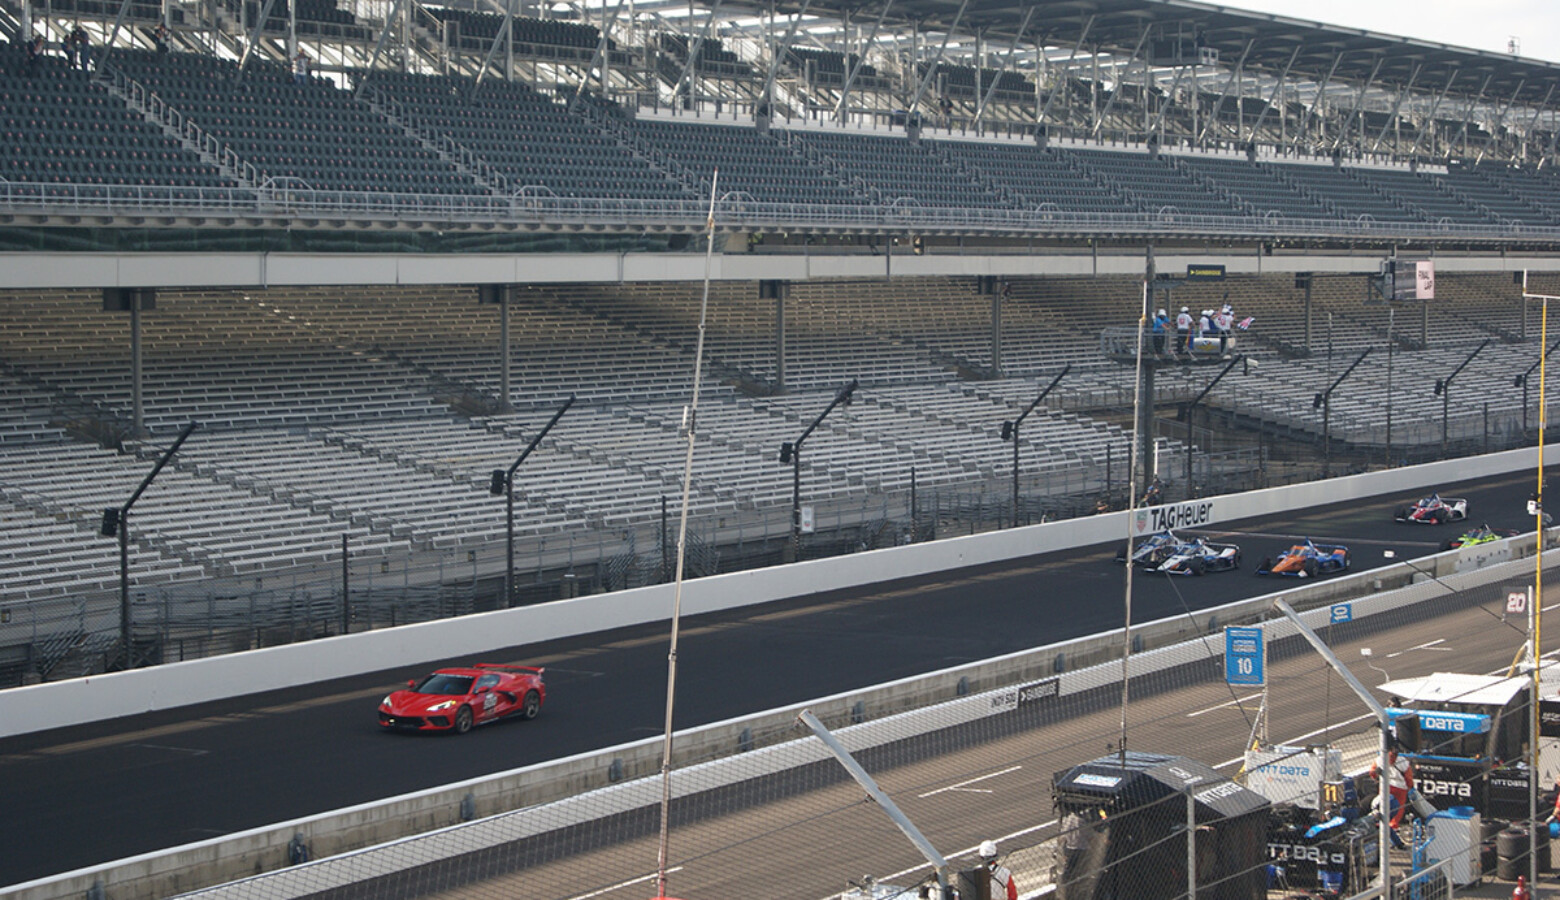 The 2020 Indianapolis 500 ran without fans in the stands in late August. (Samantha Horton/IPB News)